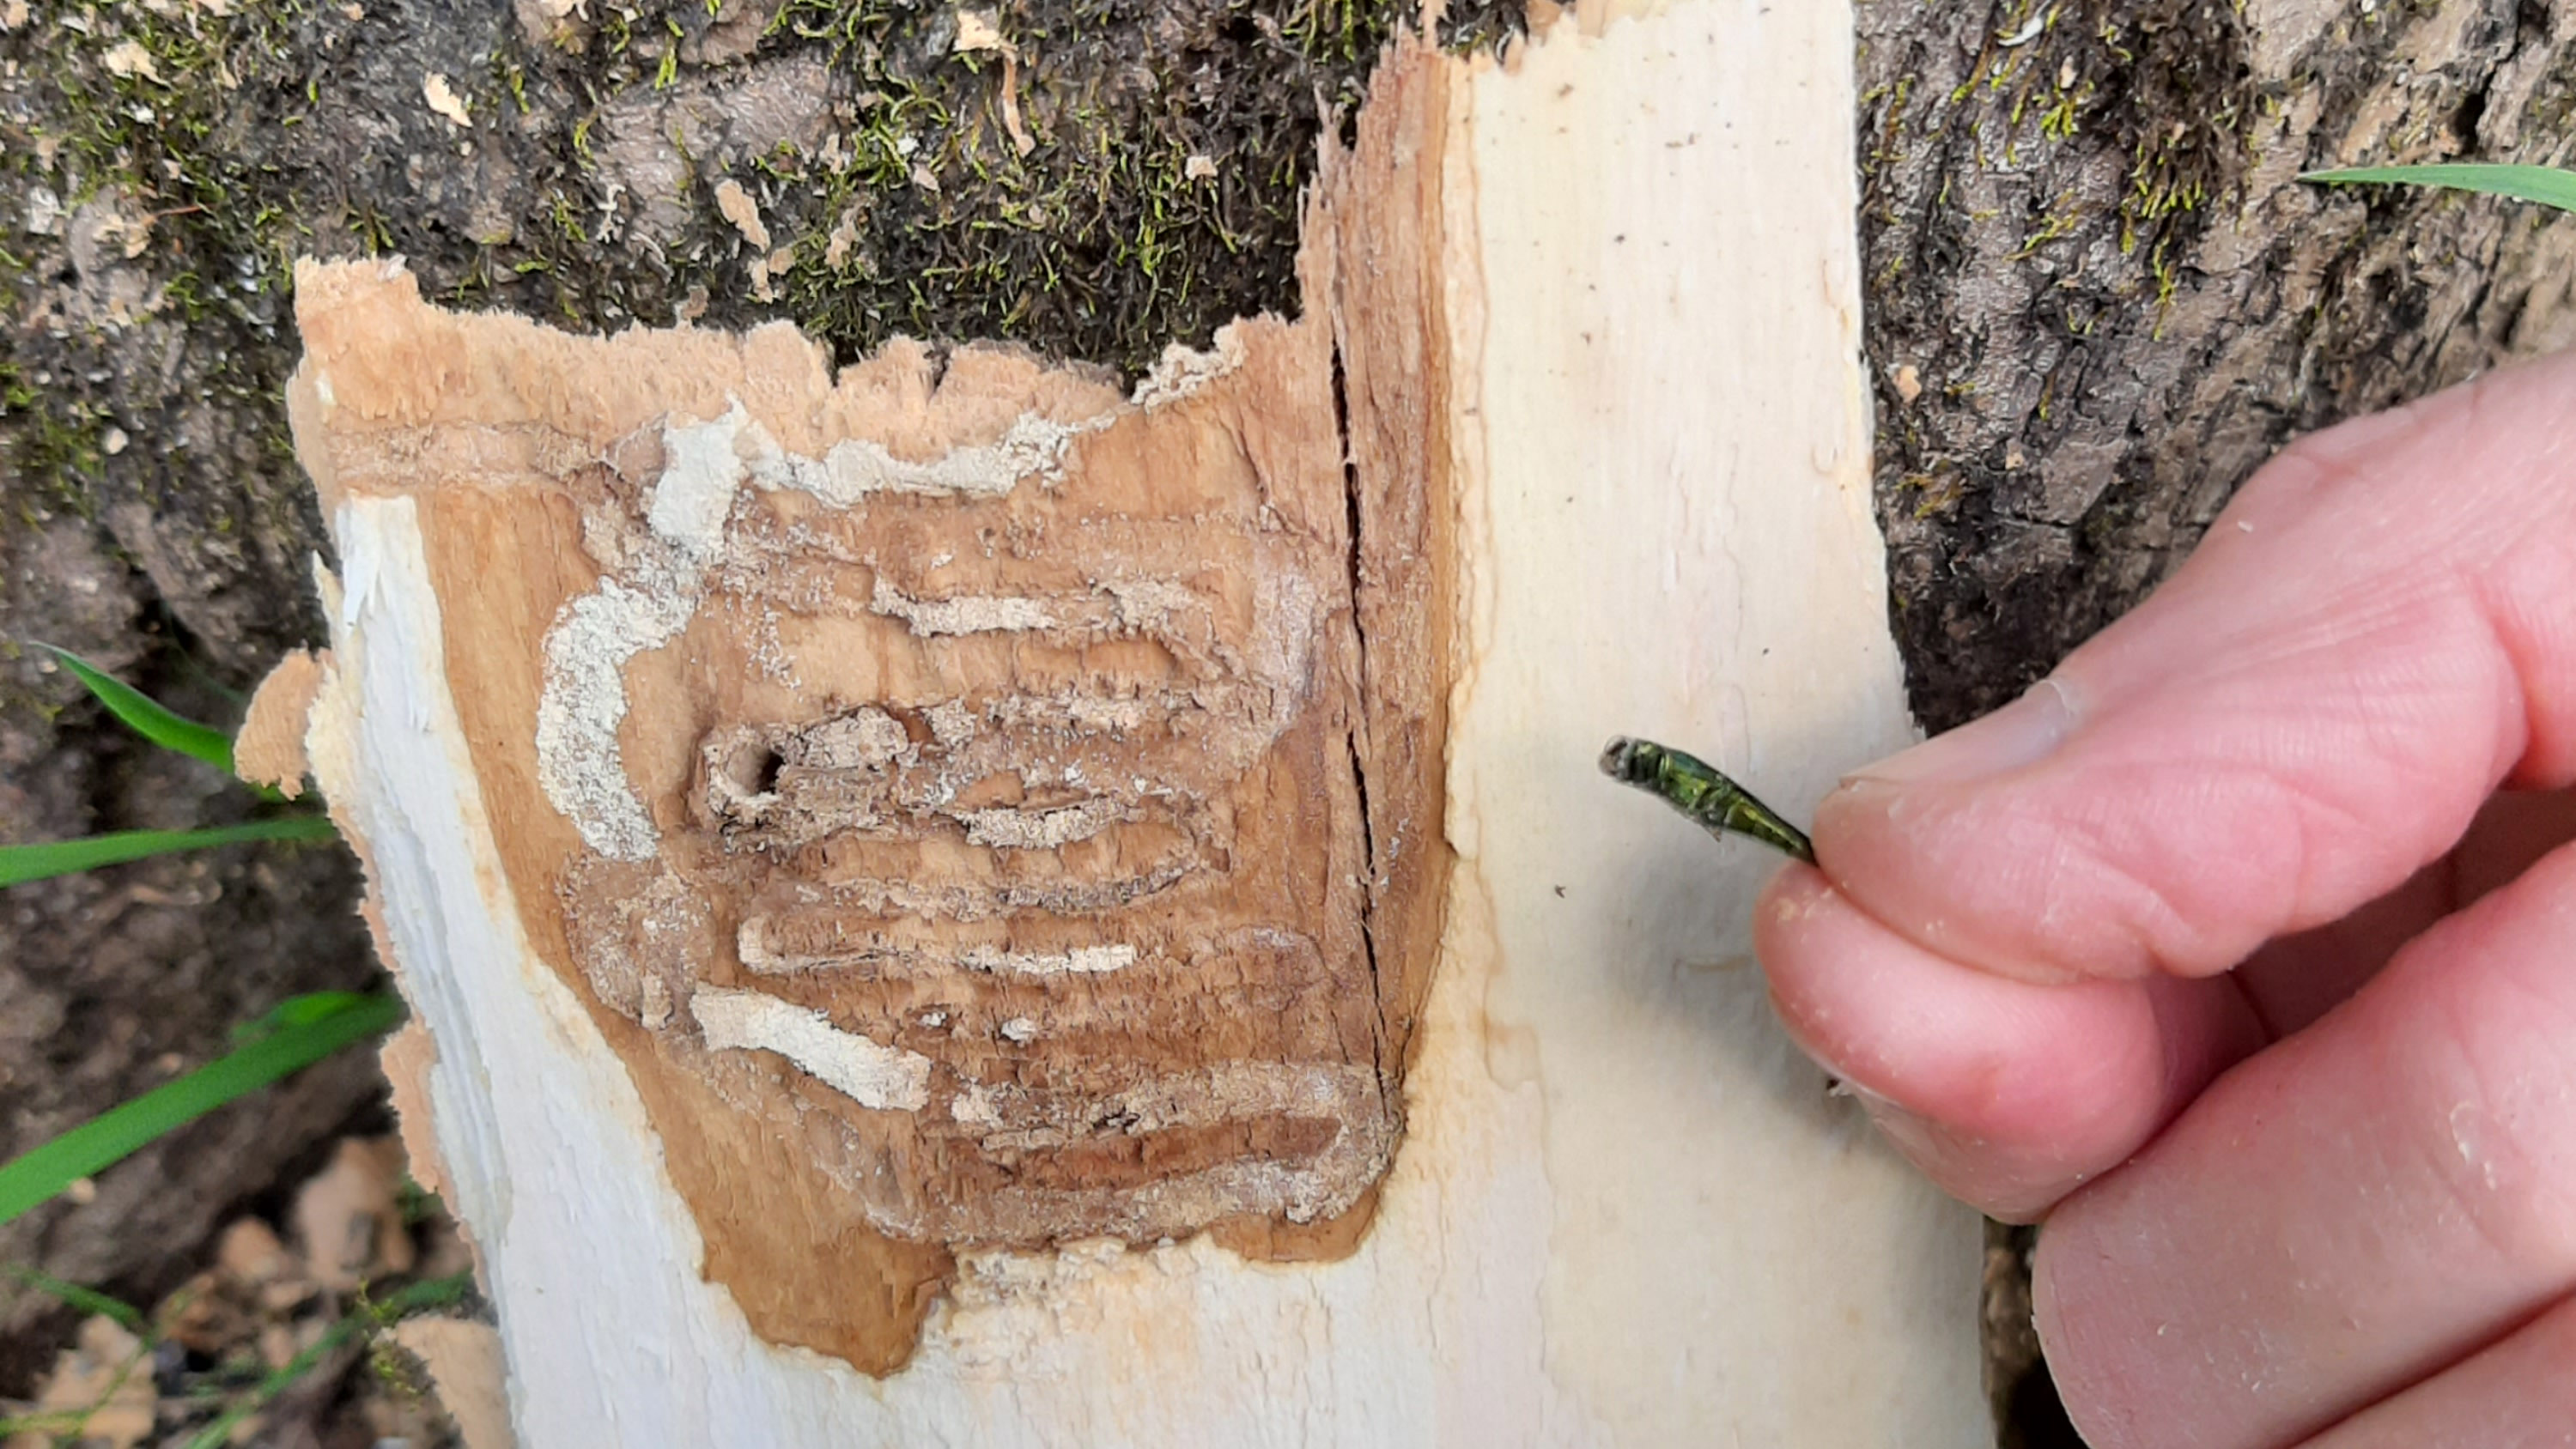 Photo courtesy of Lisa Deaton. An emerald ash borer recently found in a tree in Gloucester County.